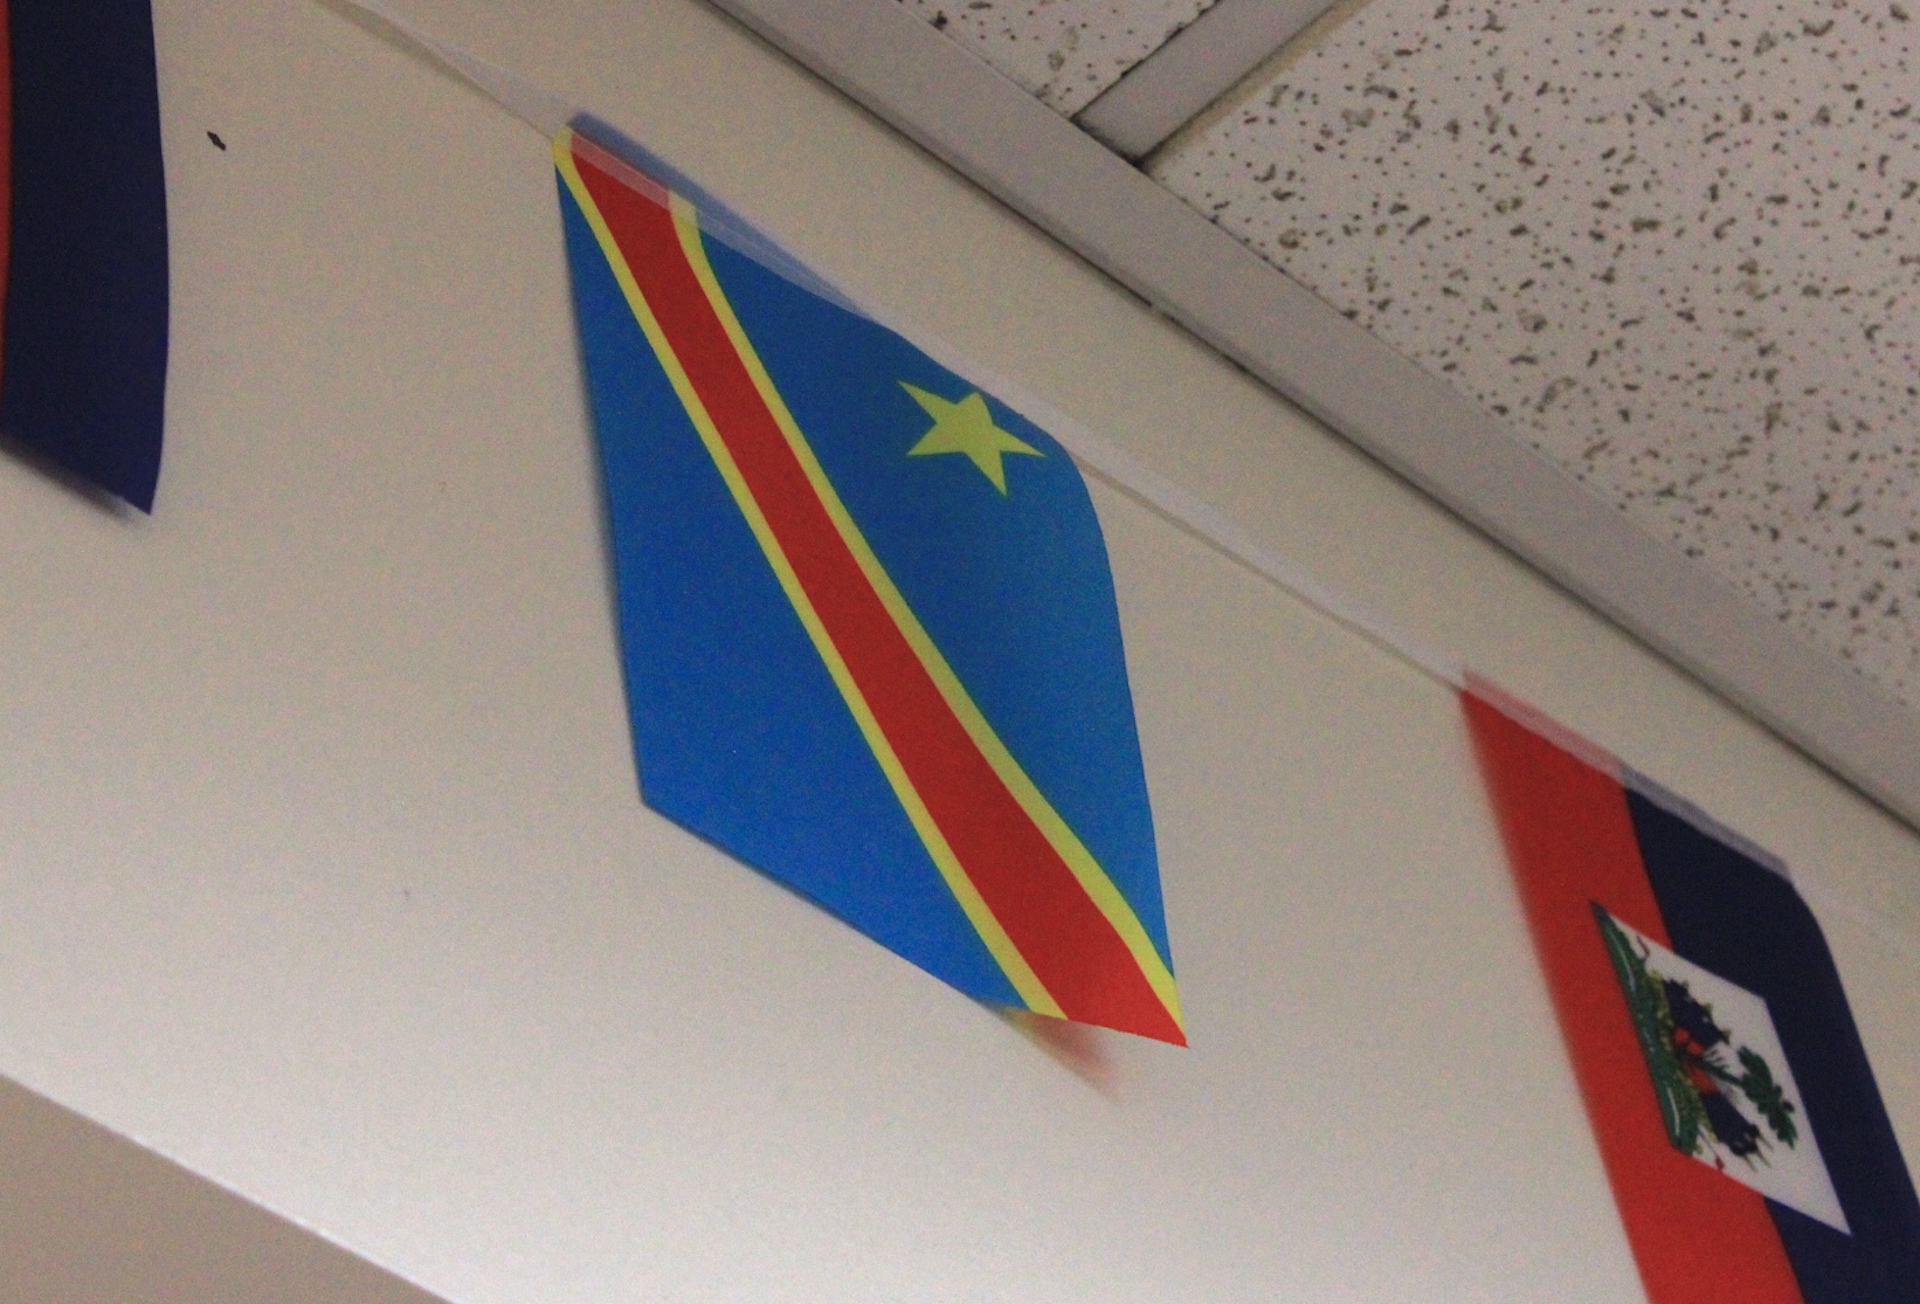 The Democratic Republic of the Congo flag hung in the Global Village located in Carmichael Student Center.